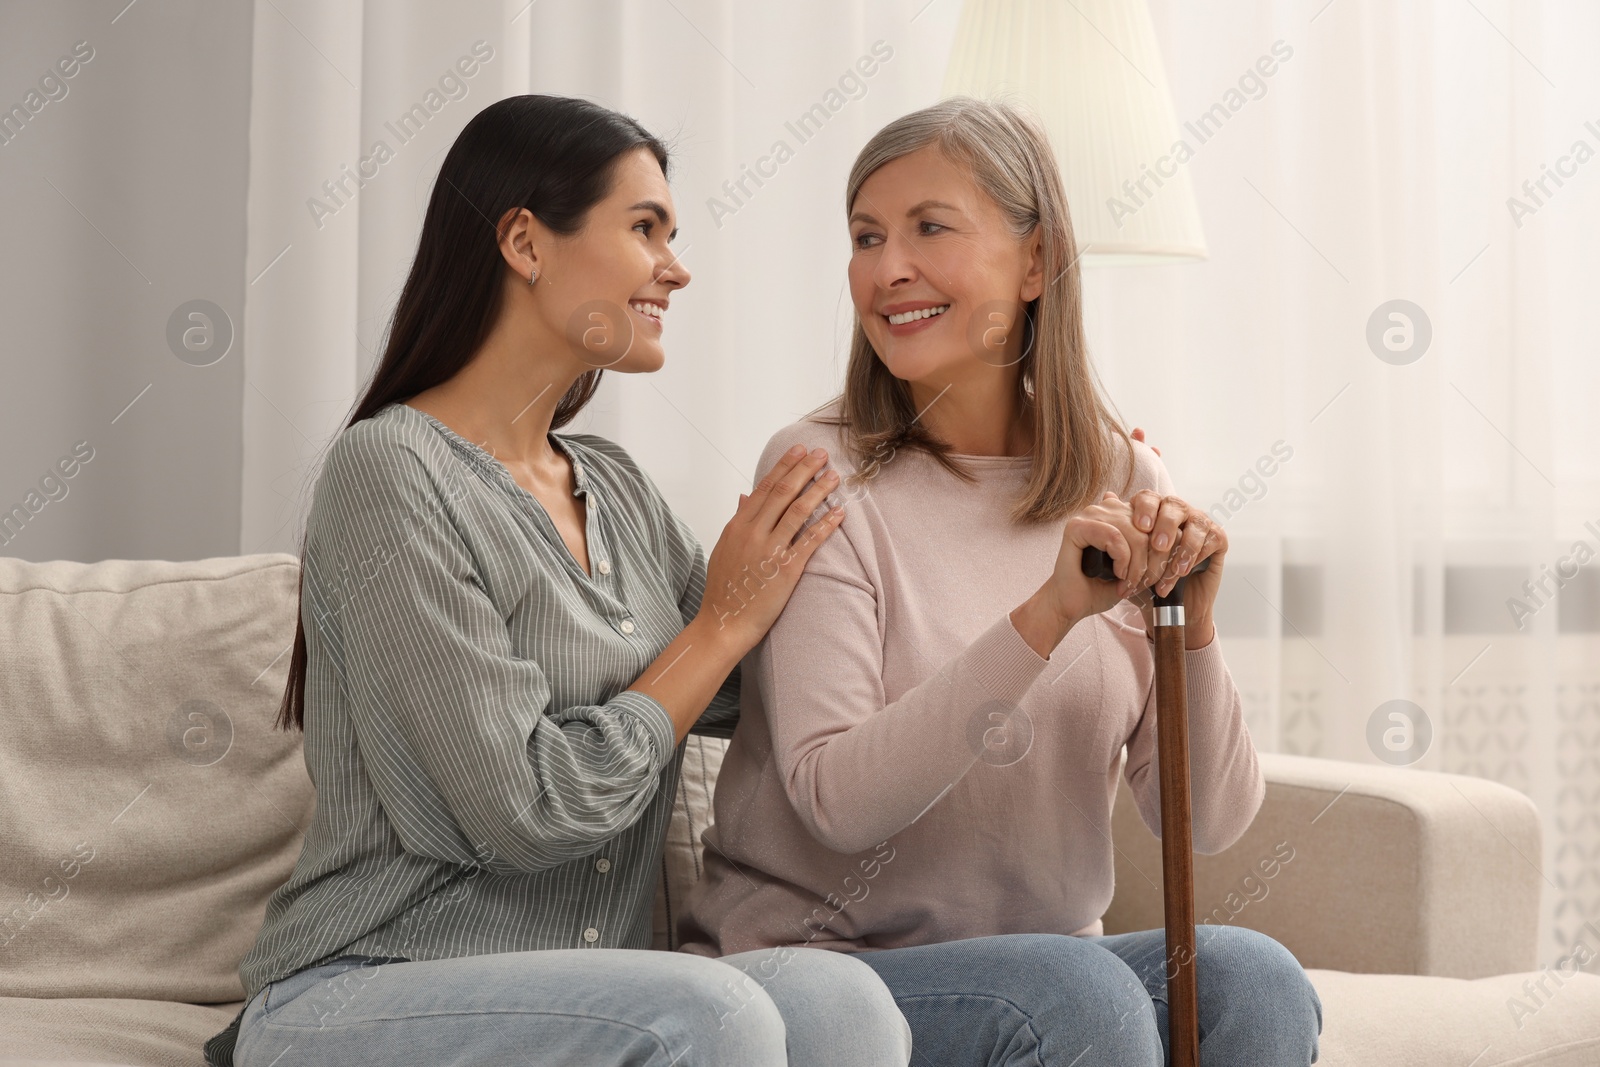 Photo of Mature lady with walking cane and young woman on sofa at home